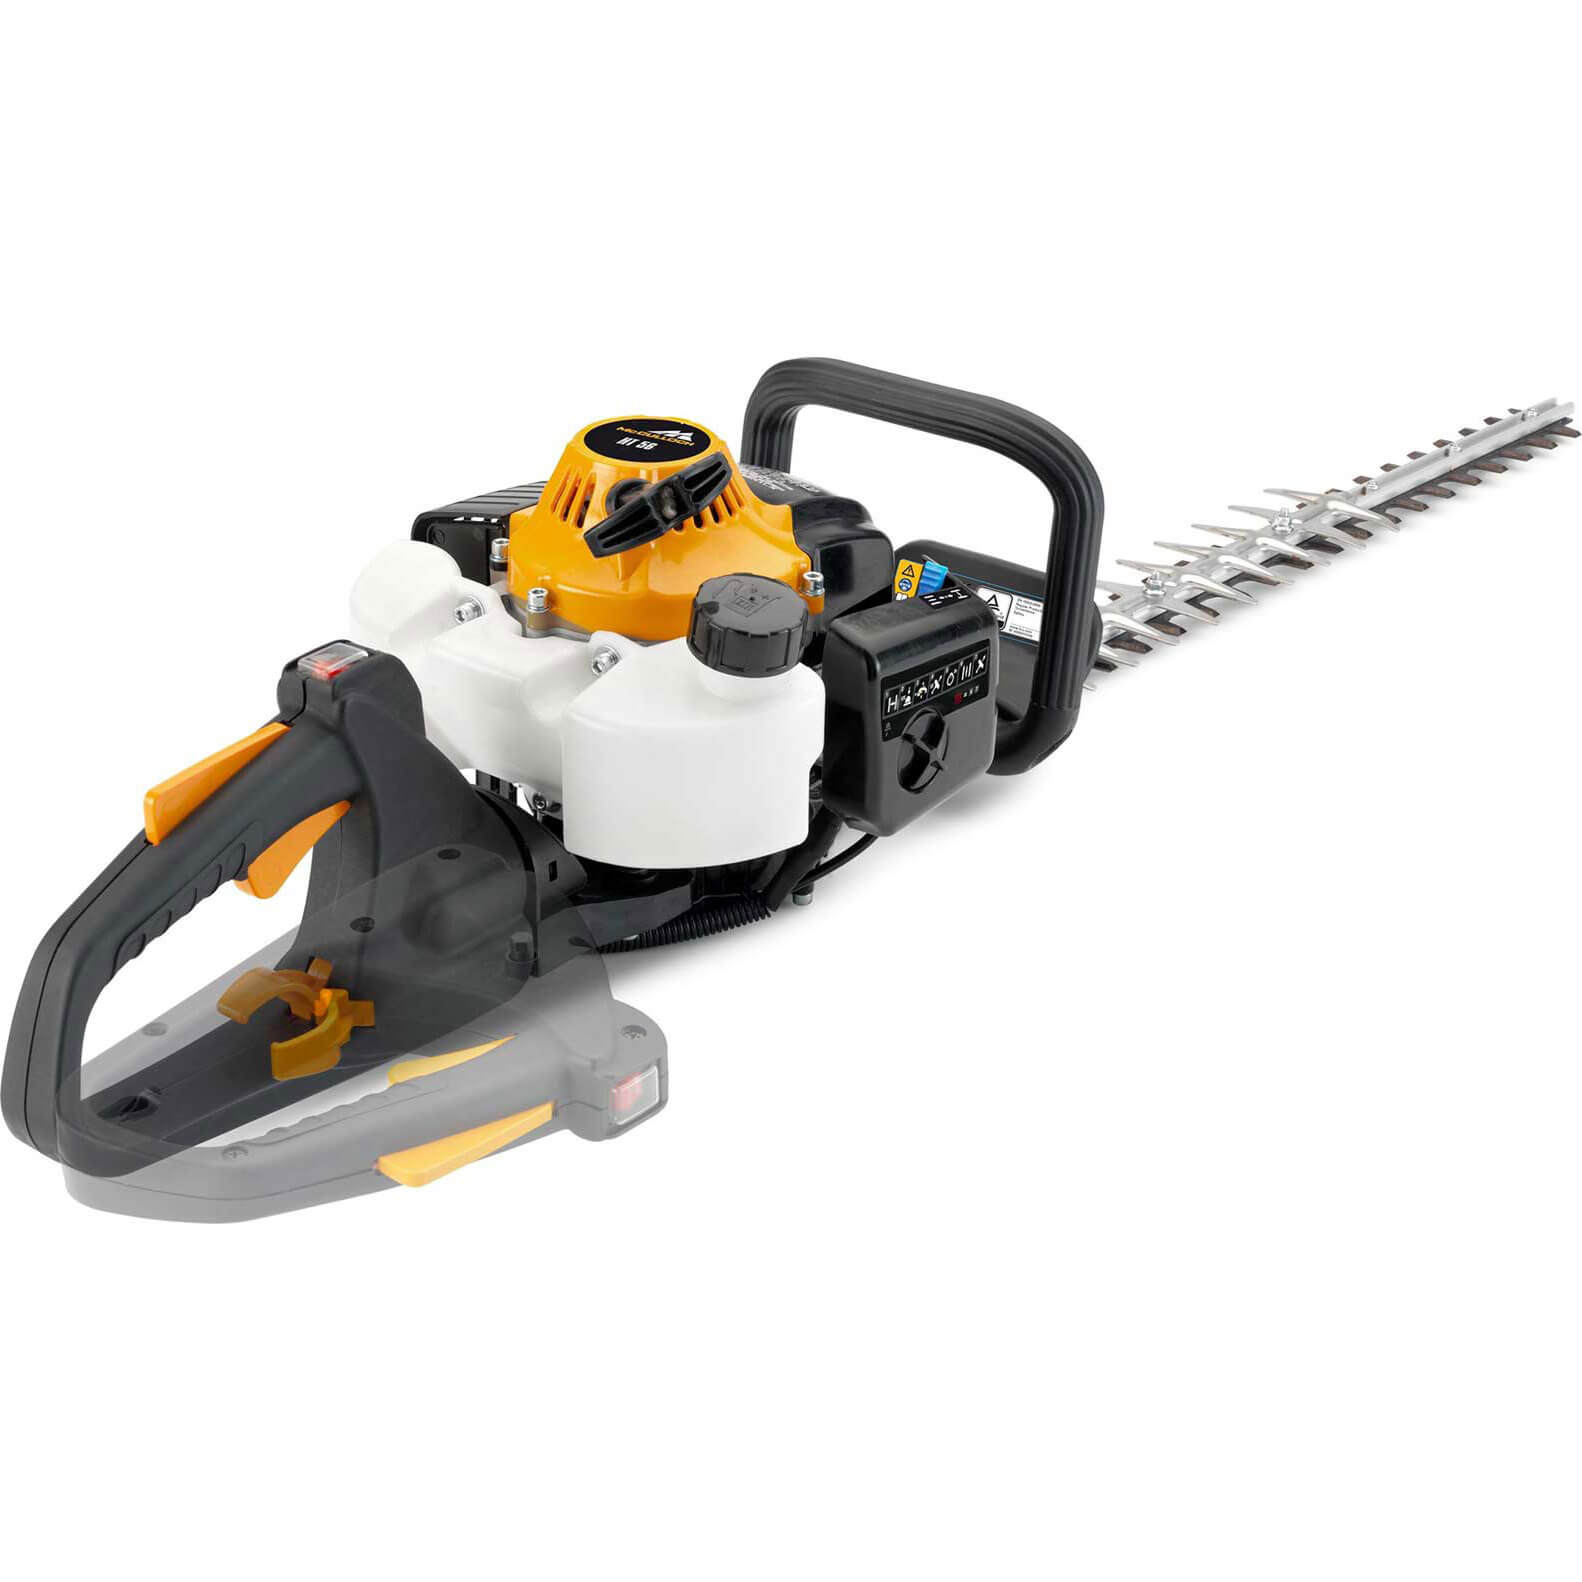 Split Shaft Cutting Blade 56 cm & TRIMMAC Trimmer: STrimmer with 40 cm Working Width Combi Guard 22 cc Mcculloch HT 5622 Petrol Hedge Trimmer Double Thread Tracking 